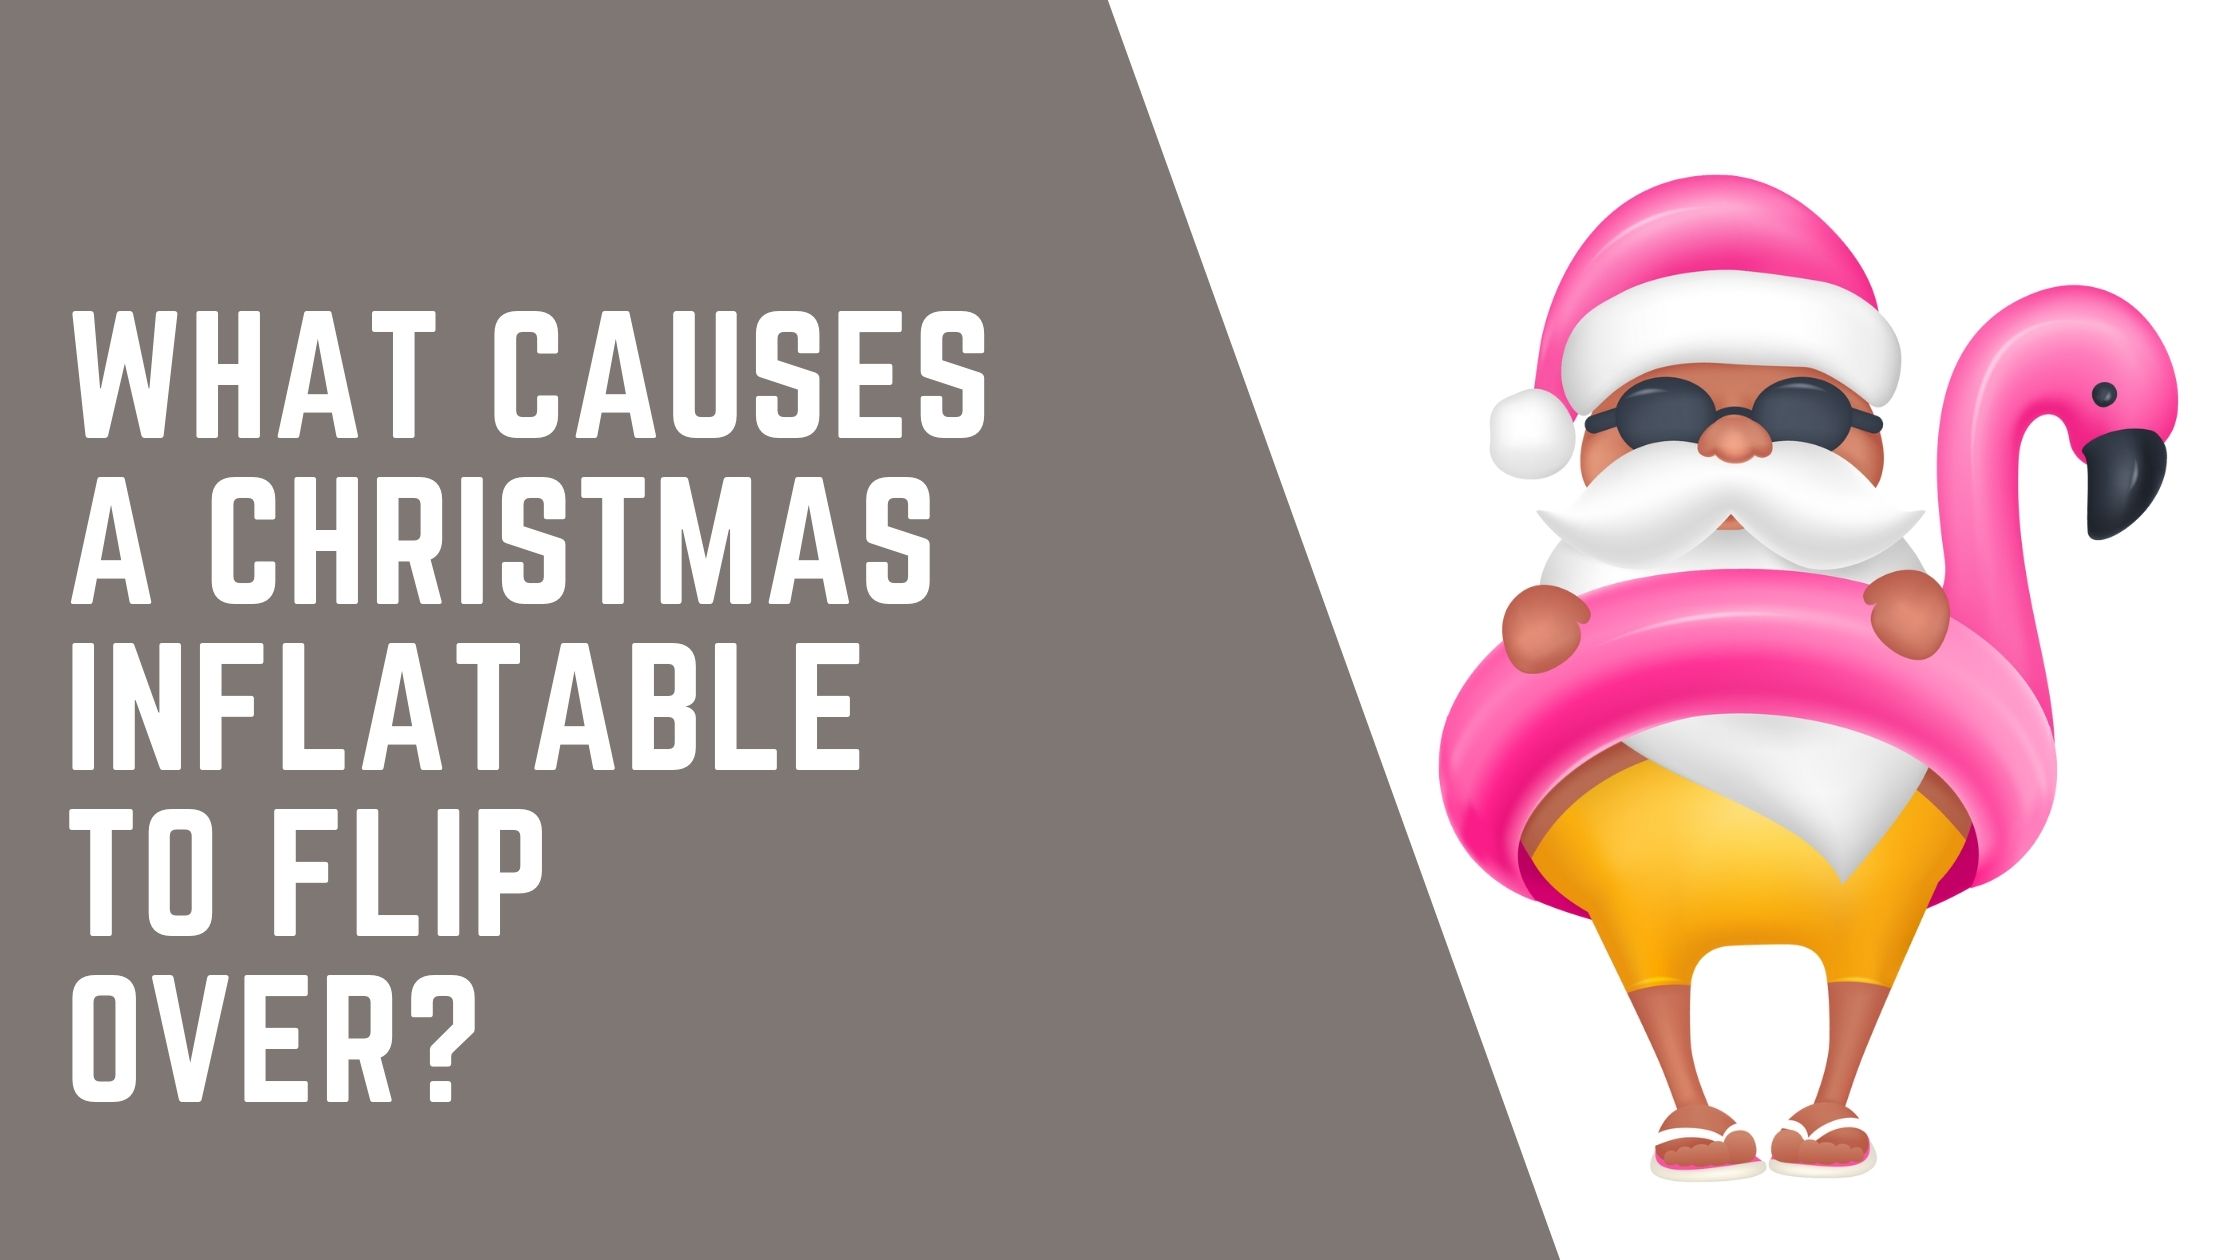 What causes a Christmas inflatable to flip over?